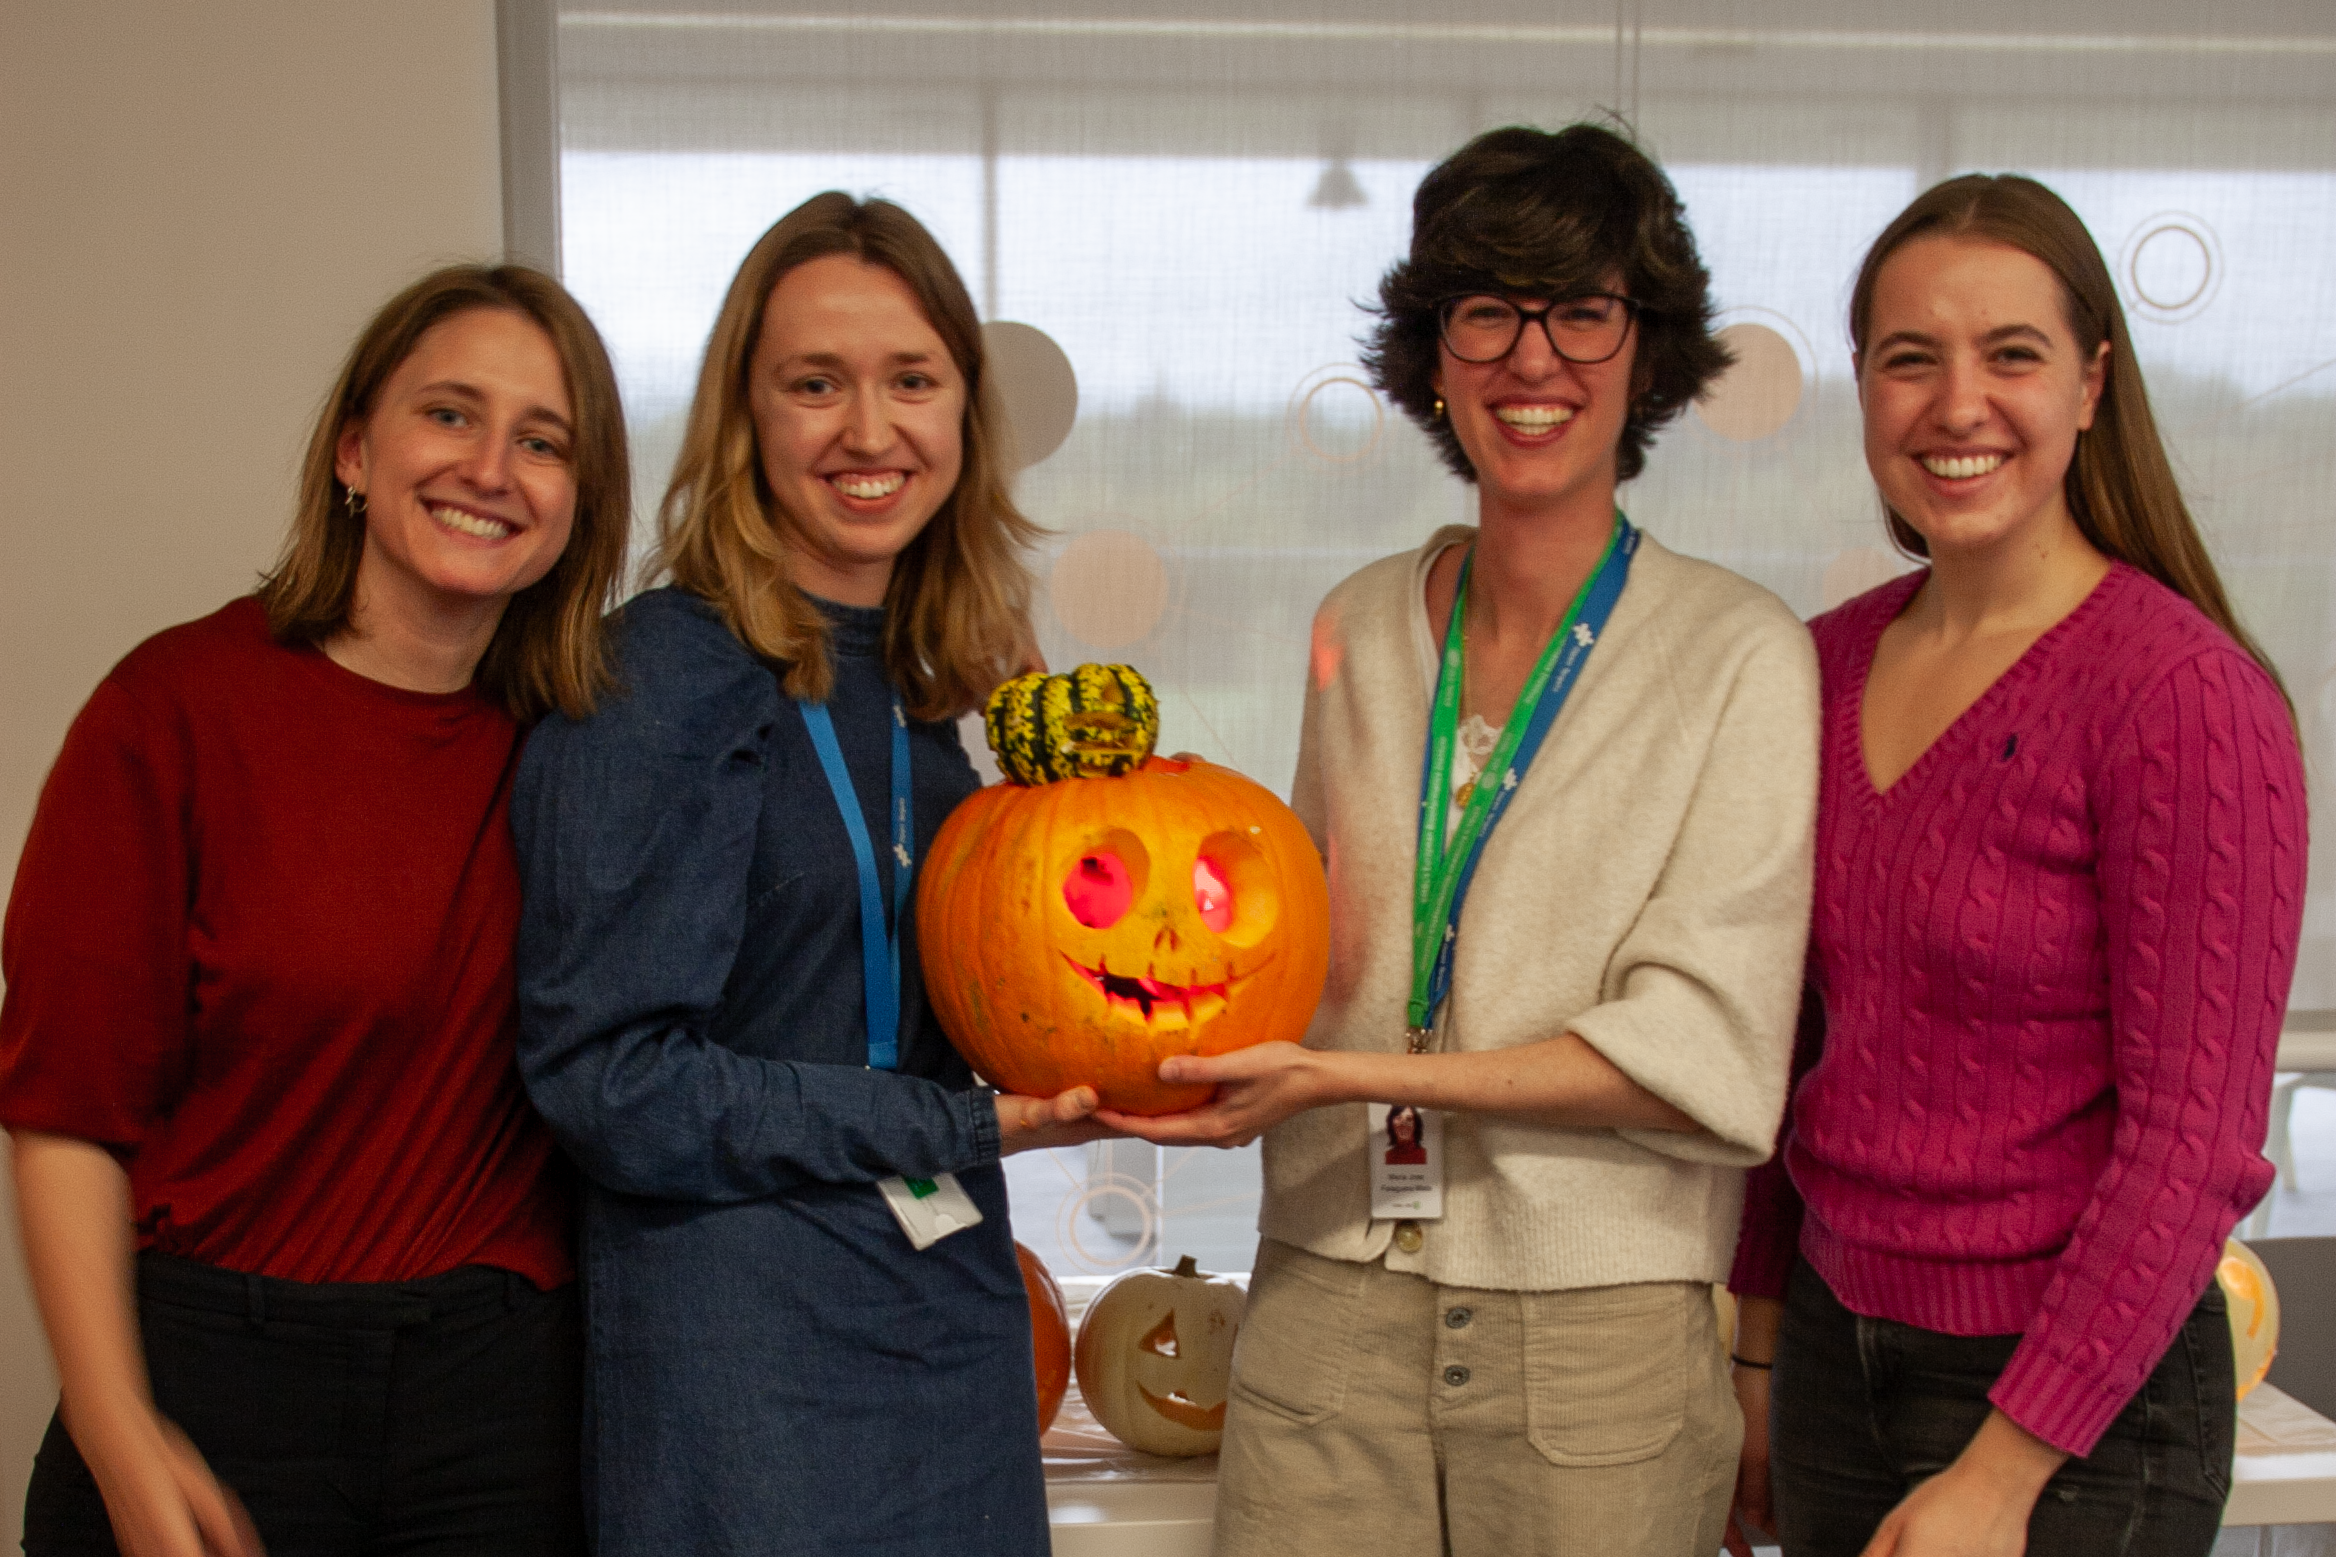 Four women stand in a line, smiling at the camera. They are holding up a carved orange pumpkin with a crooked smile, on top of which sits a small green pumpkin carved with the Open Targets logo. More pumpkins can be seen on the table behind them.